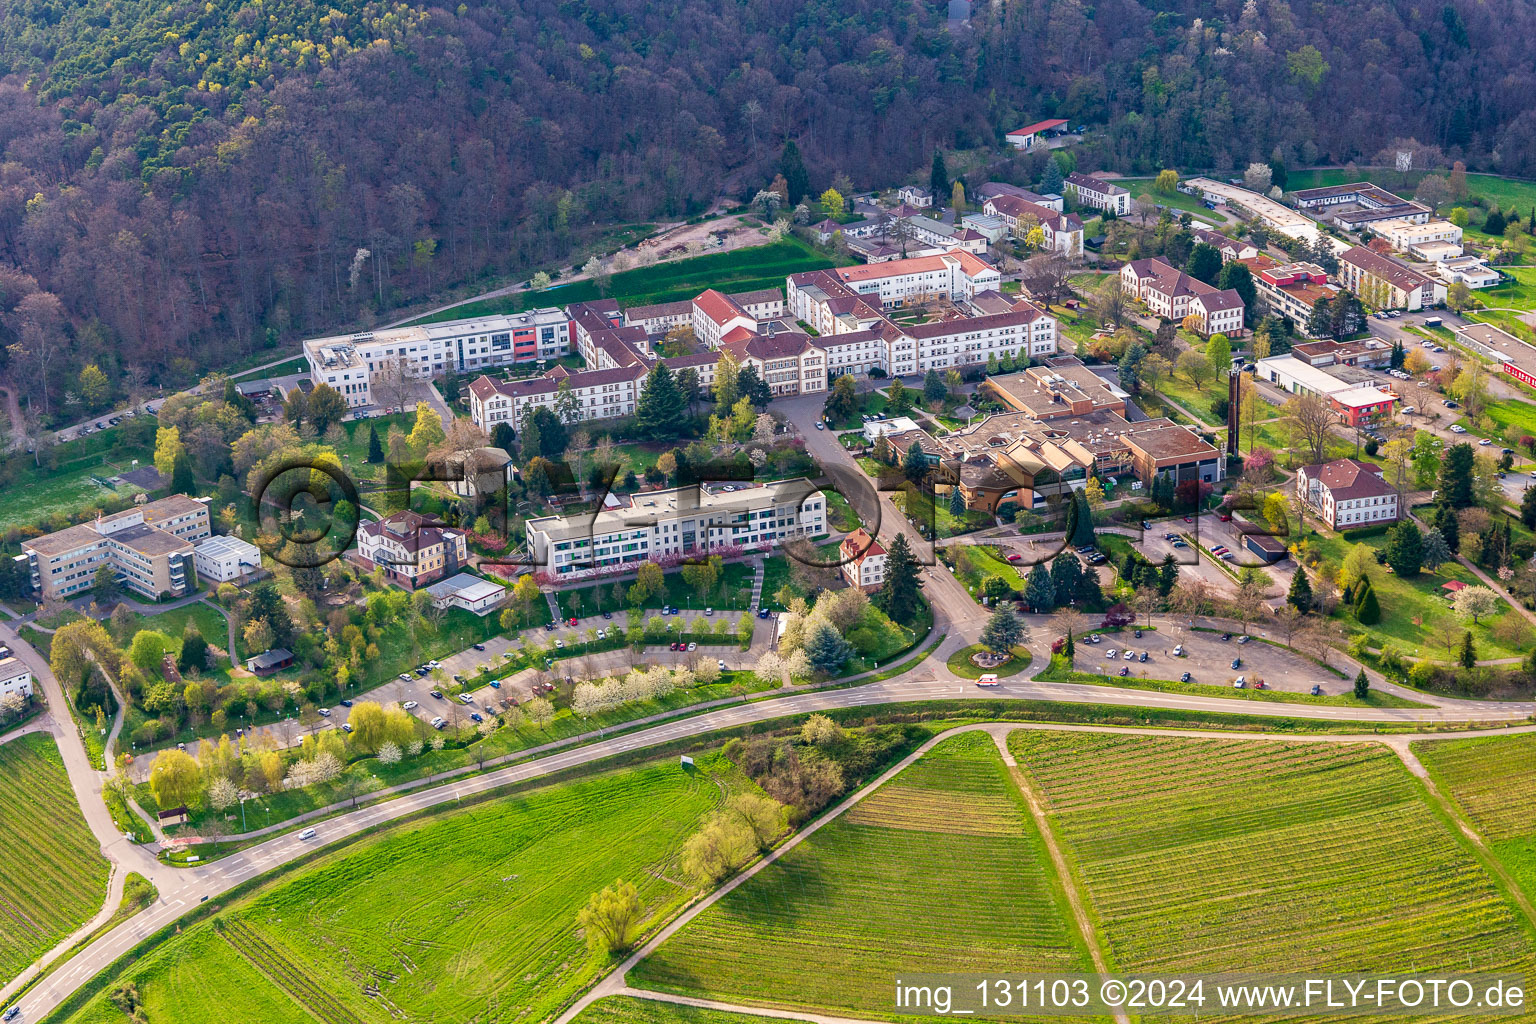 Palatinate Clinic Landeck in Klingenmünster in the state Rhineland-Palatinate, Germany from the plane